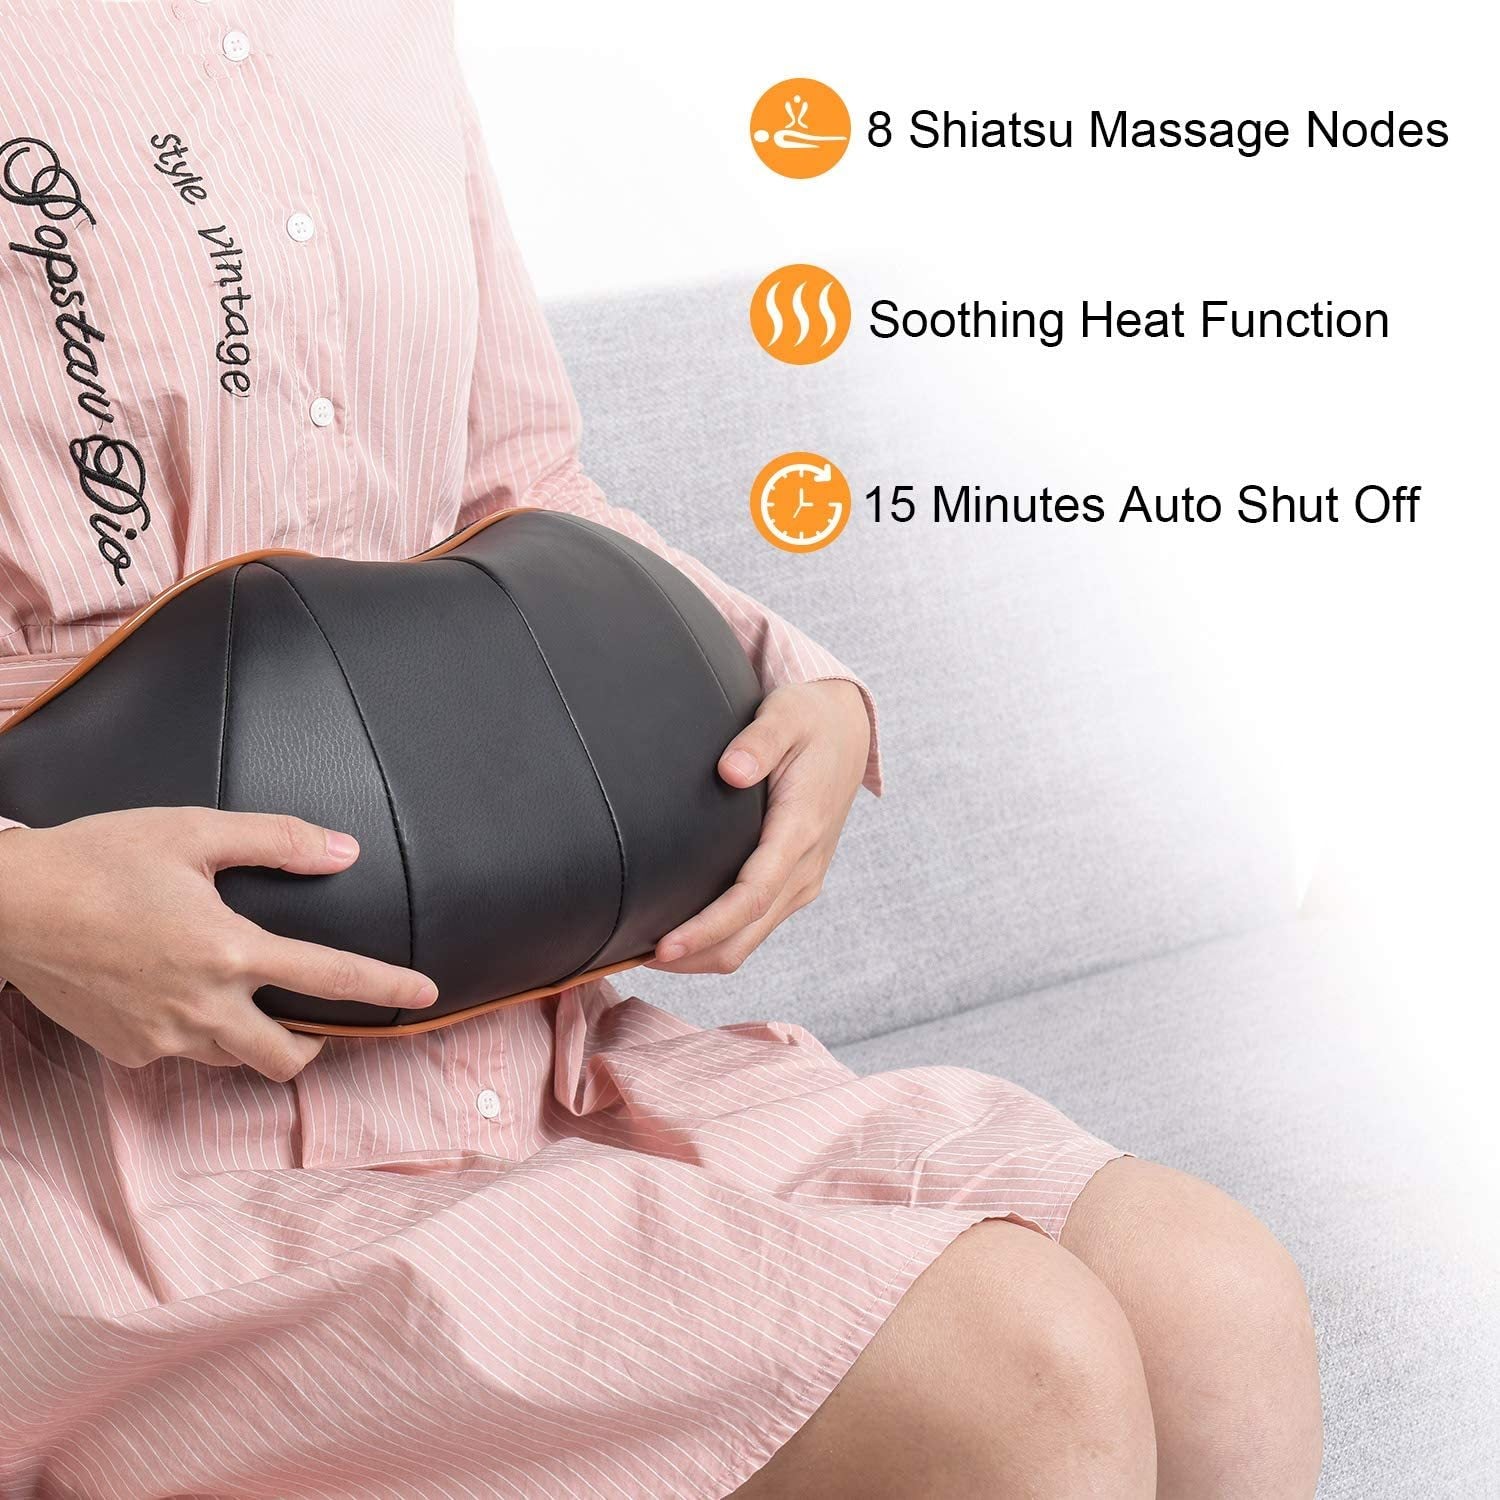  MagicMakers Neck Massager, Back Massager with Heat, Shiatsu  Massager Neck, Electric Shoulder Massager, Kneading Massager Back, Massage  for Neck Pain Back Pain, Birthday Gifts for Women Men : Health & Household